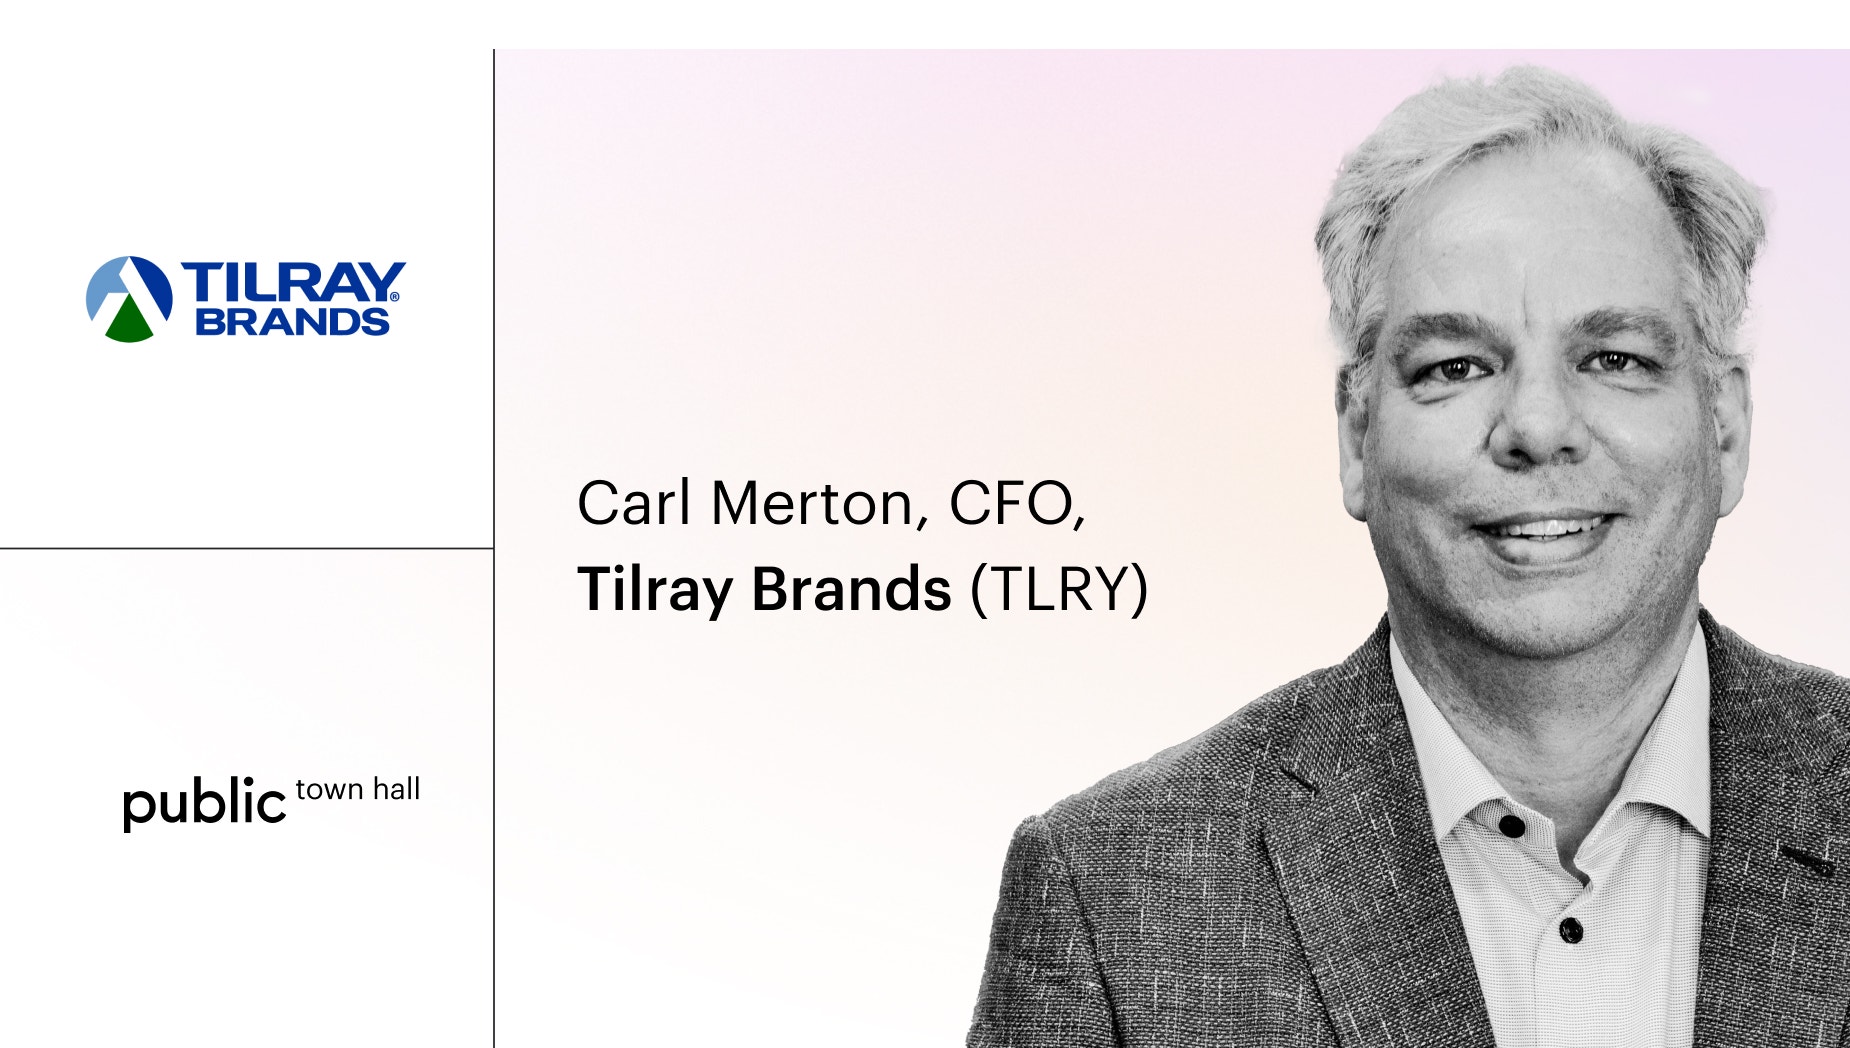 EXCLUSIVE: Tilray Brands CFO Talks Cannabis Legalization & Building a Diverse Roster of 'Lifestyle CPG Brands'